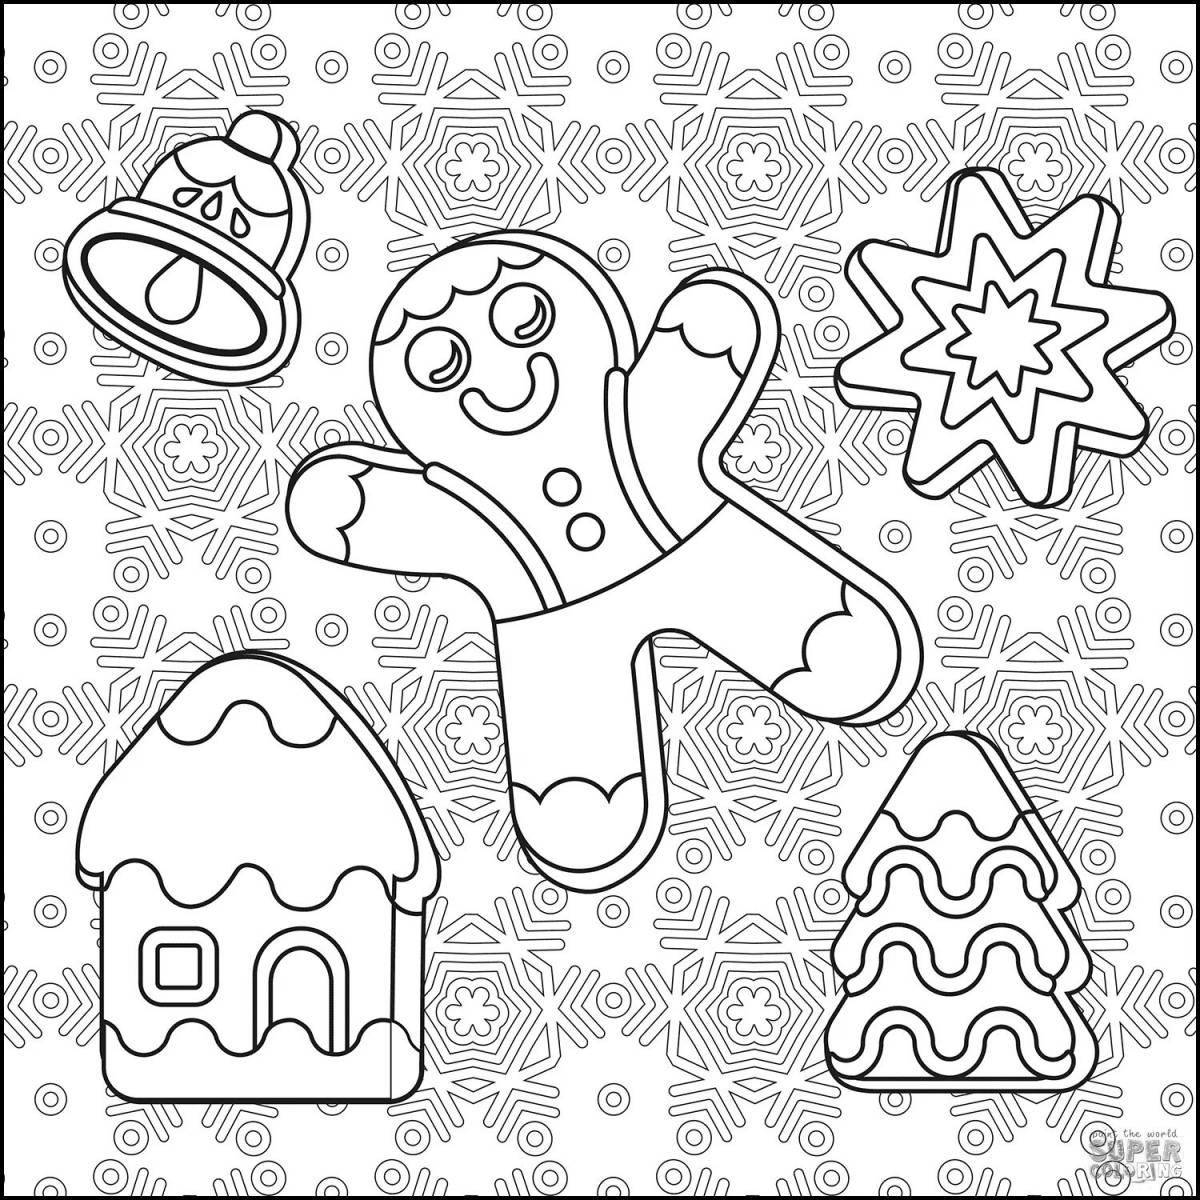 Delightful gingerbread coloring pages